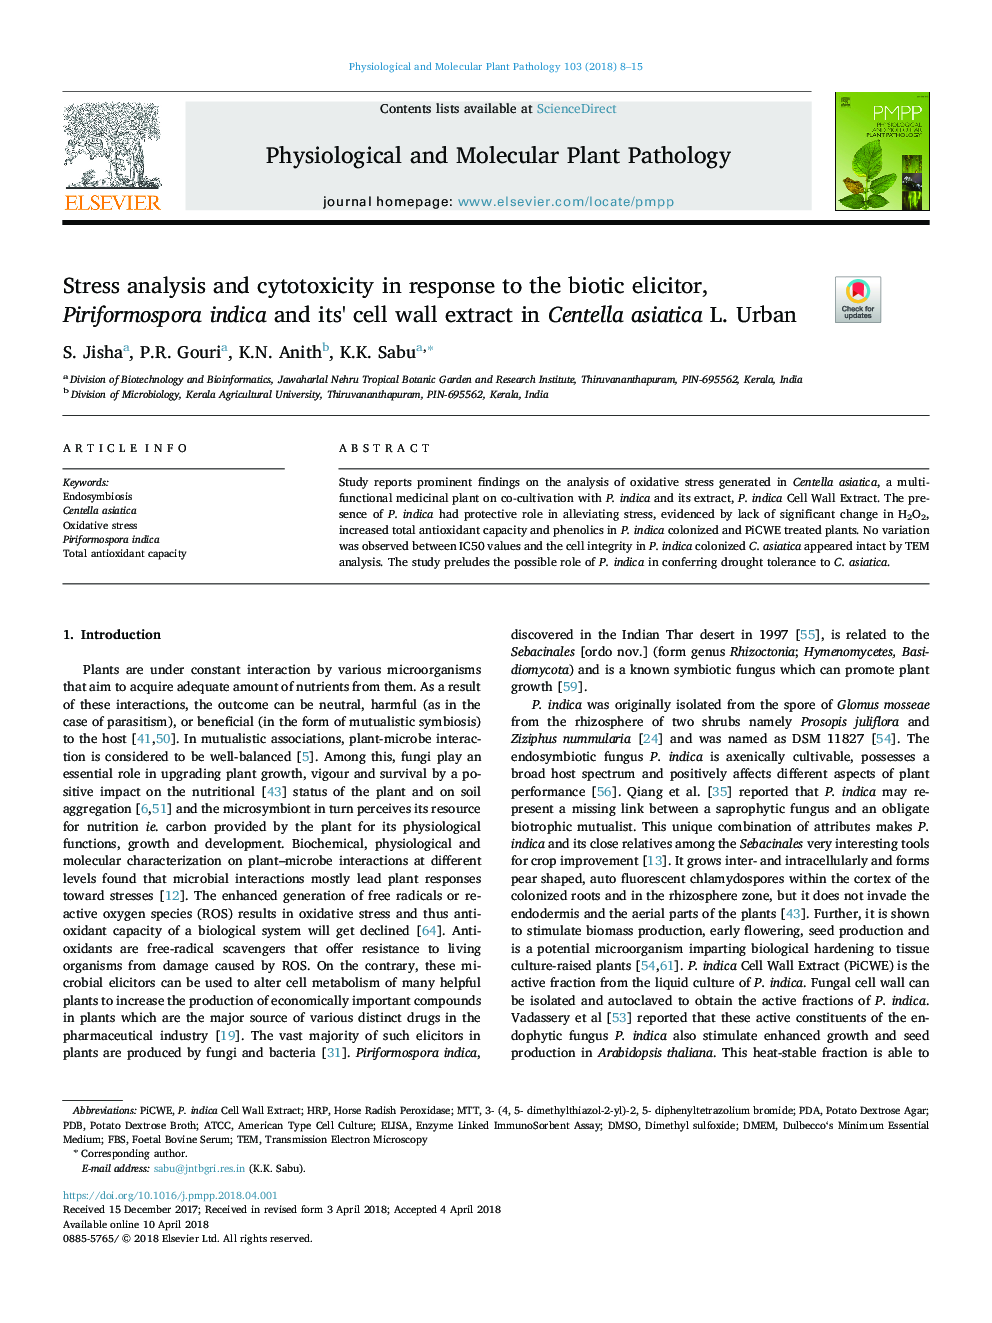 Stress analysis and cytotoxicity in response to the biotic elicitor, Piriformospora indica and its' cell wall extract in Centella asiatica L. Urban